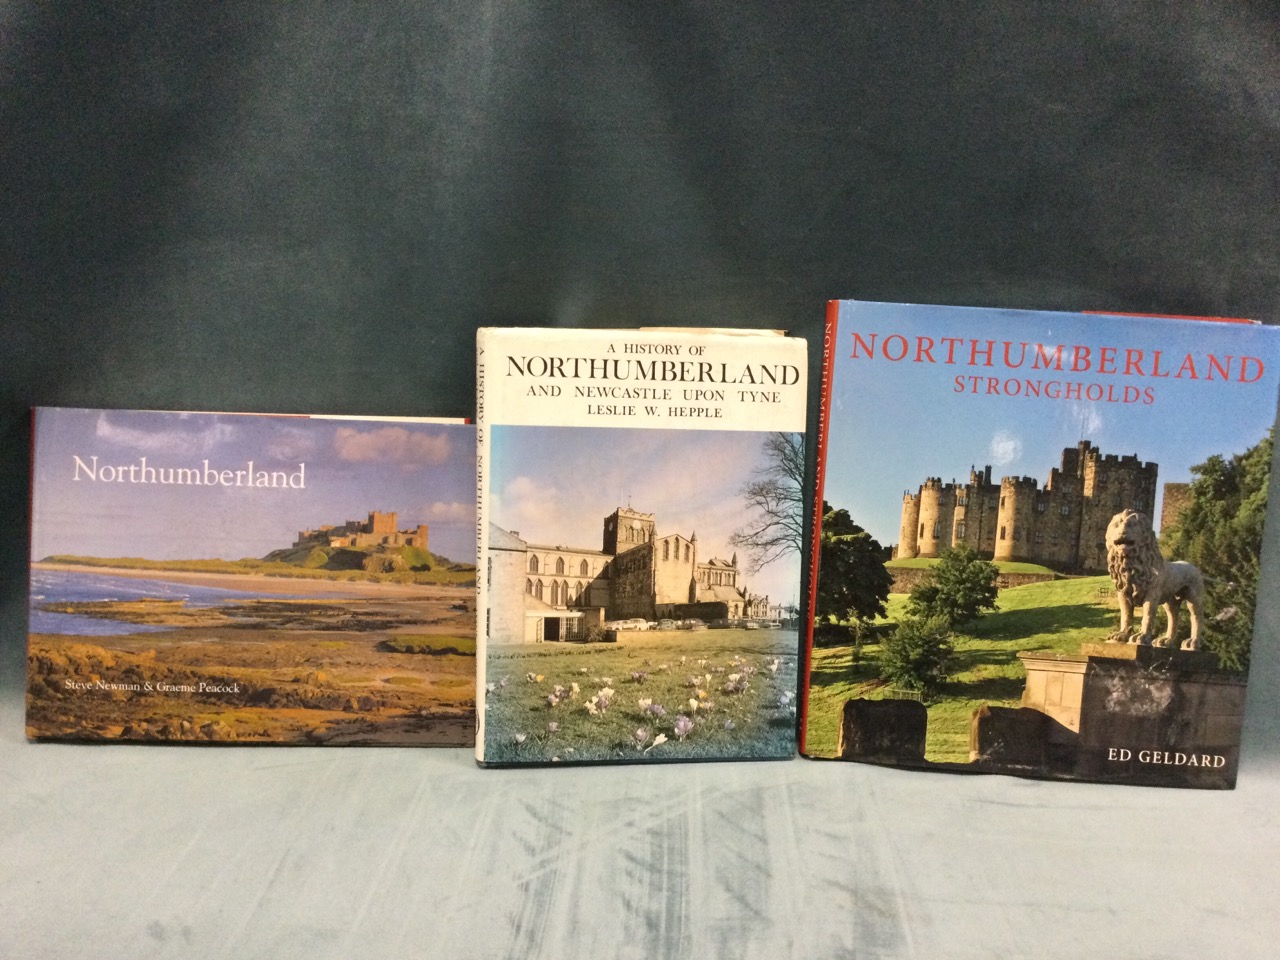 A collection of books on Northumberland and northern England - The Three Northern Counties of - Image 3 of 3